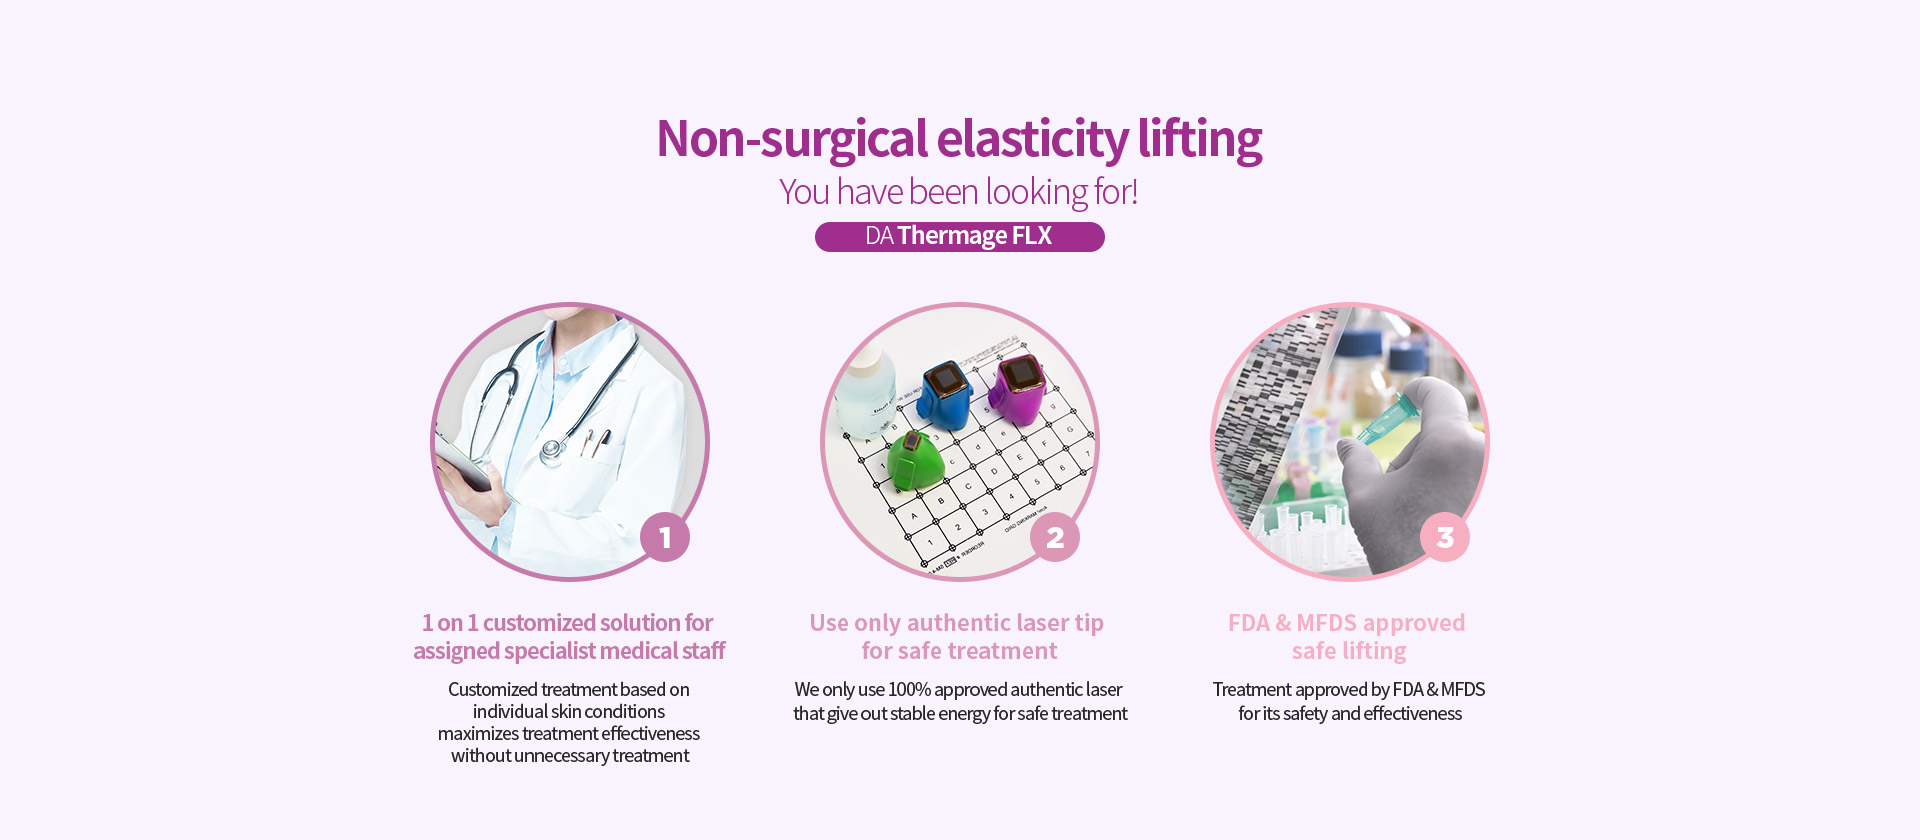 Non-surgical elasticity lifting You have been looking for!